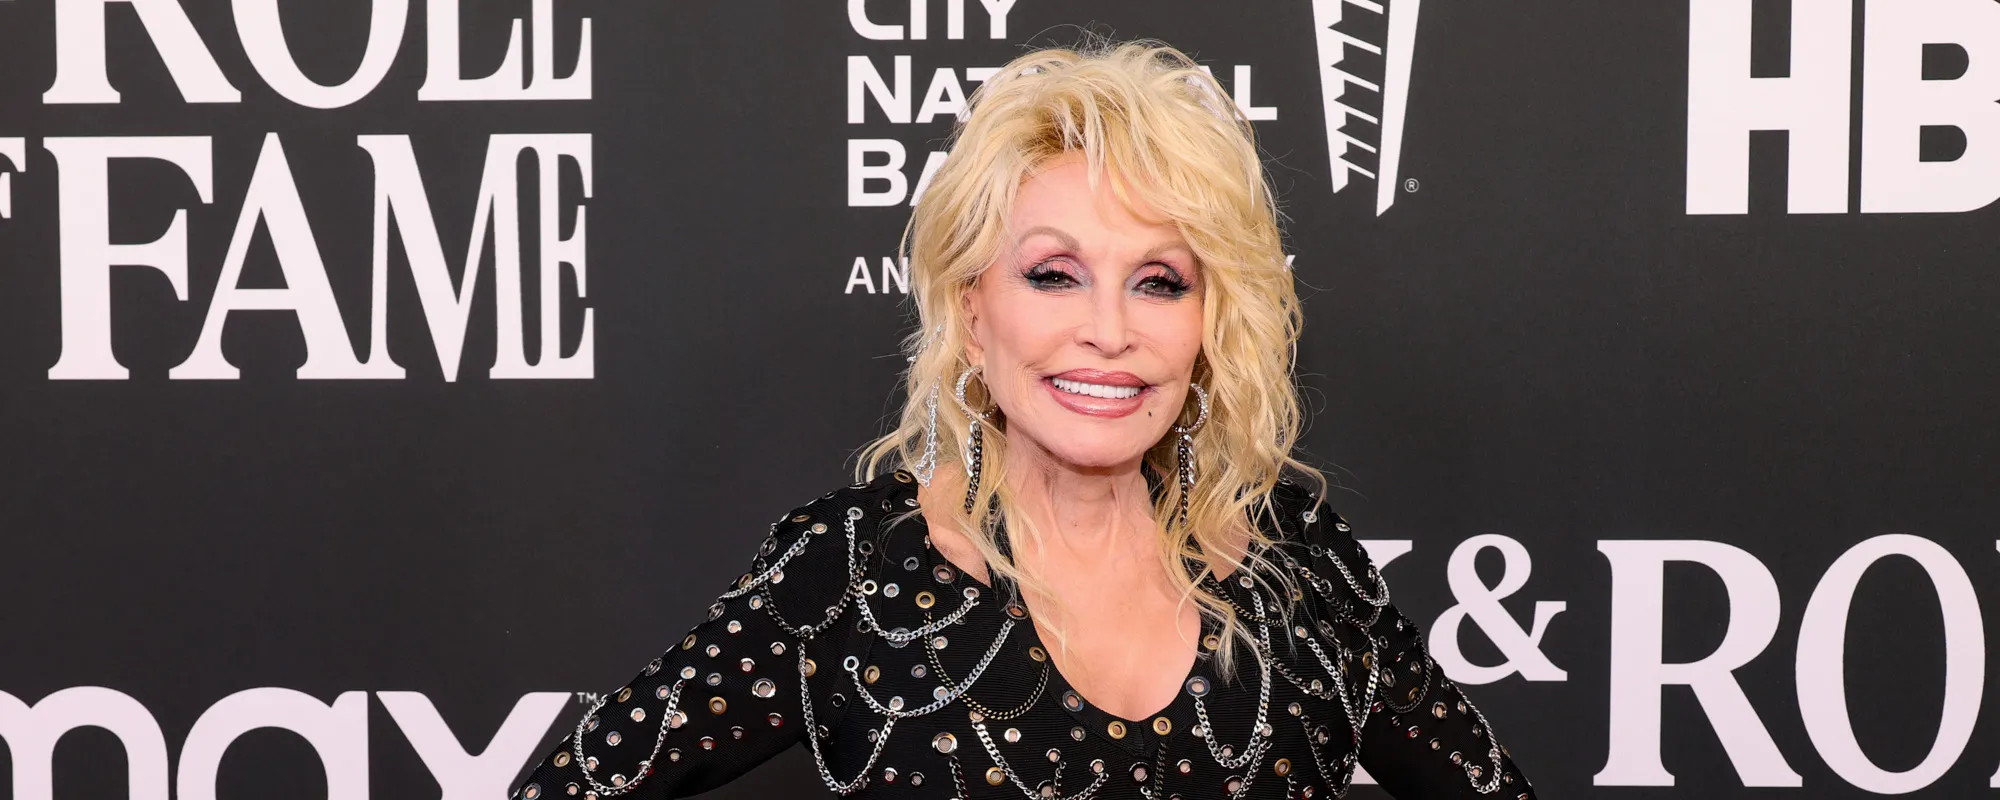 Dolly Parton Talks Opening a Museum and ‘Dolly Center’ in Music City